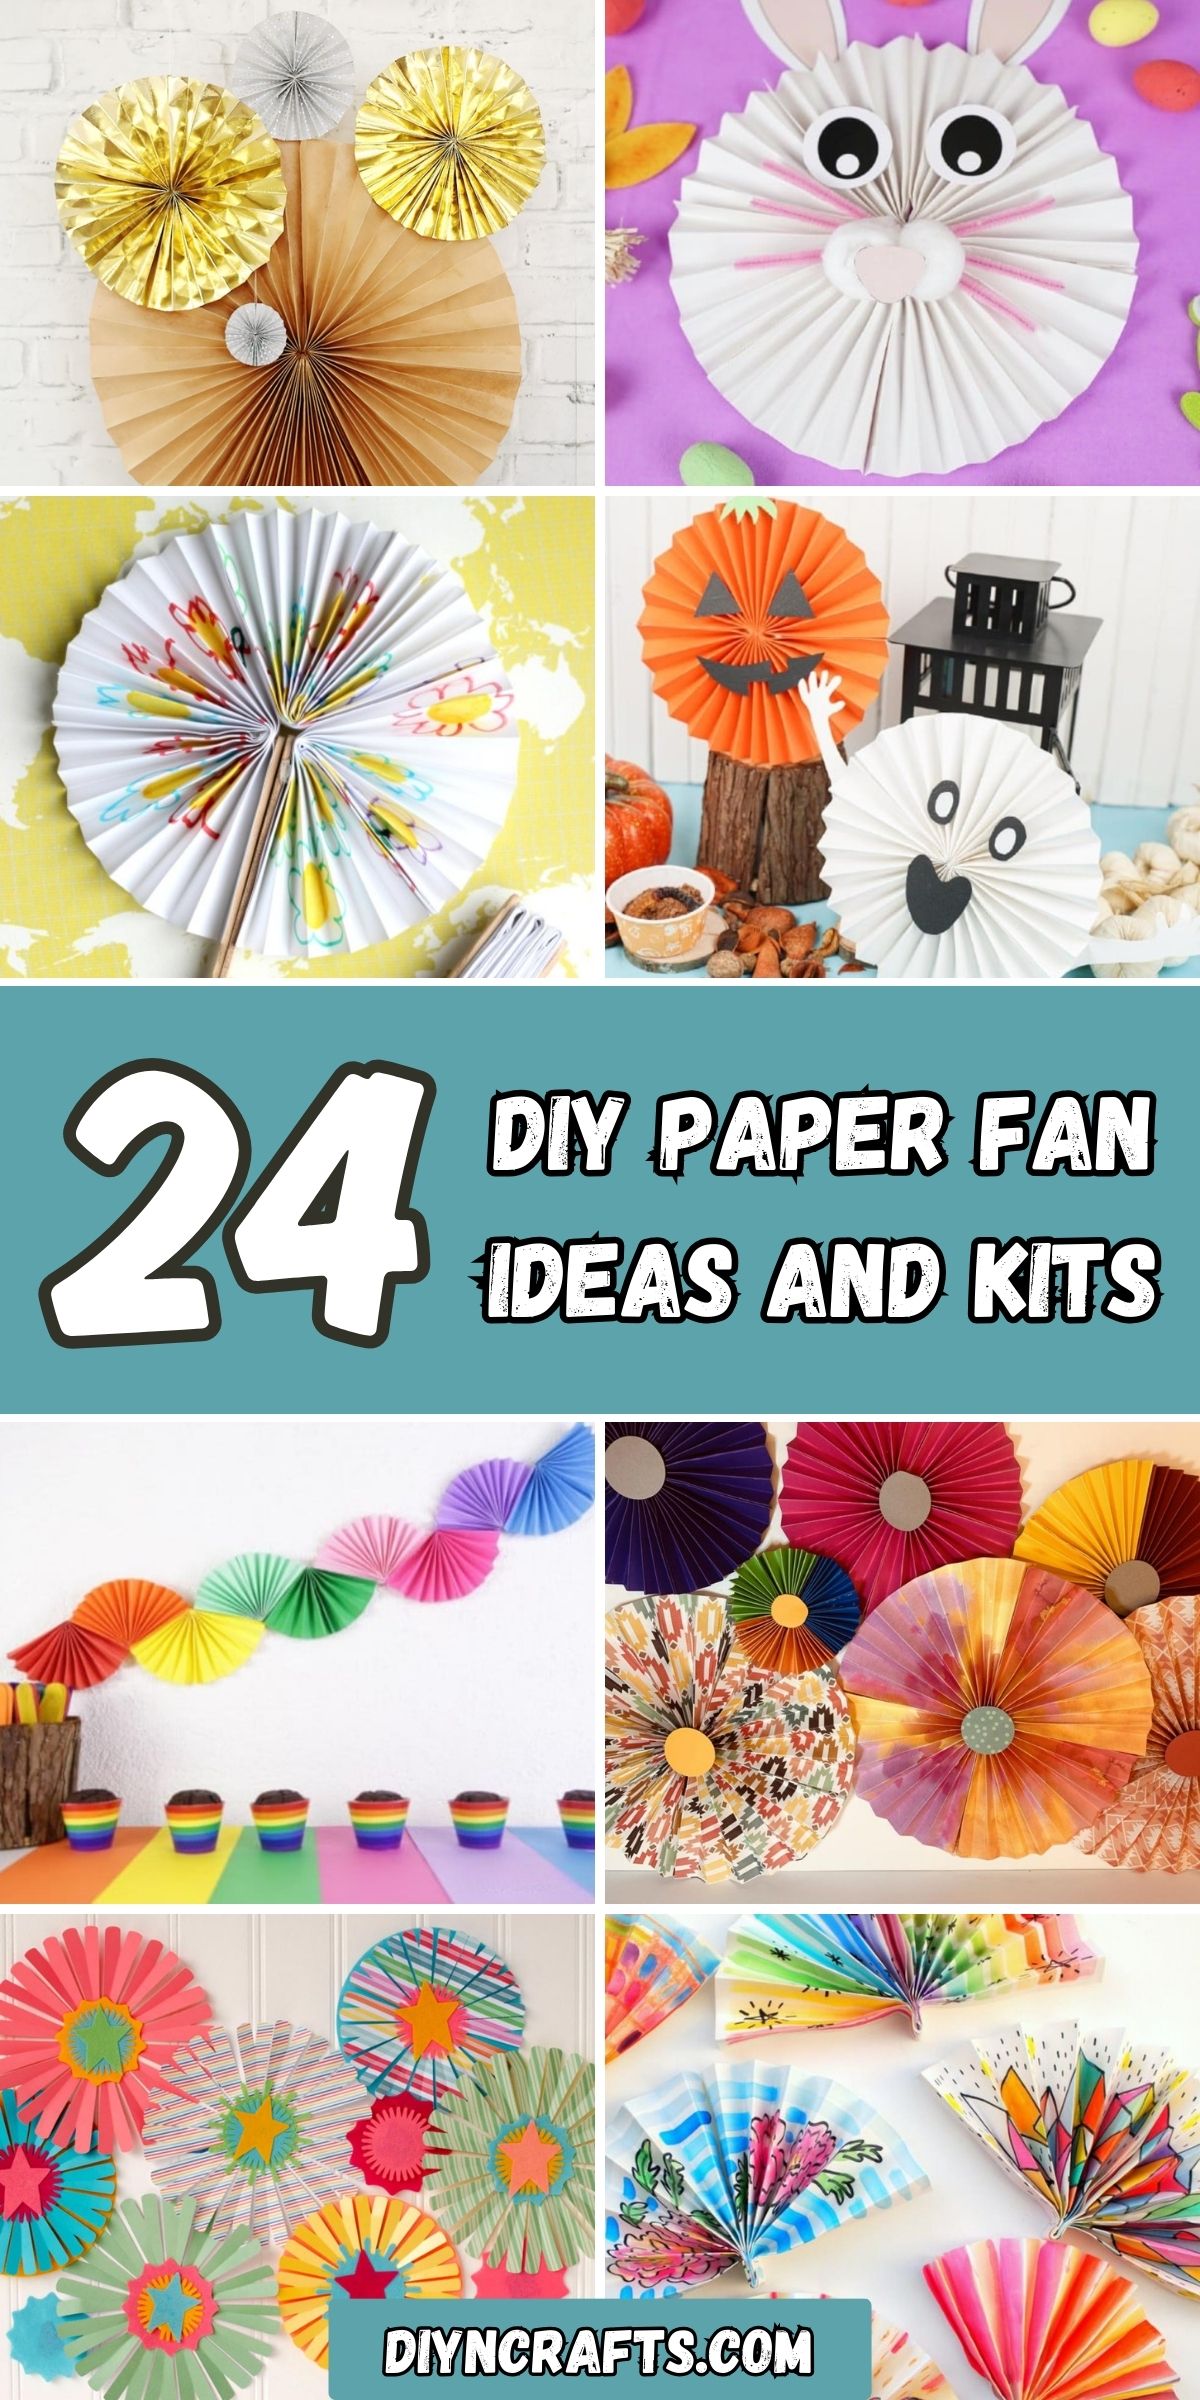 24 DIY Paper Fan Ideas and Kits collage.